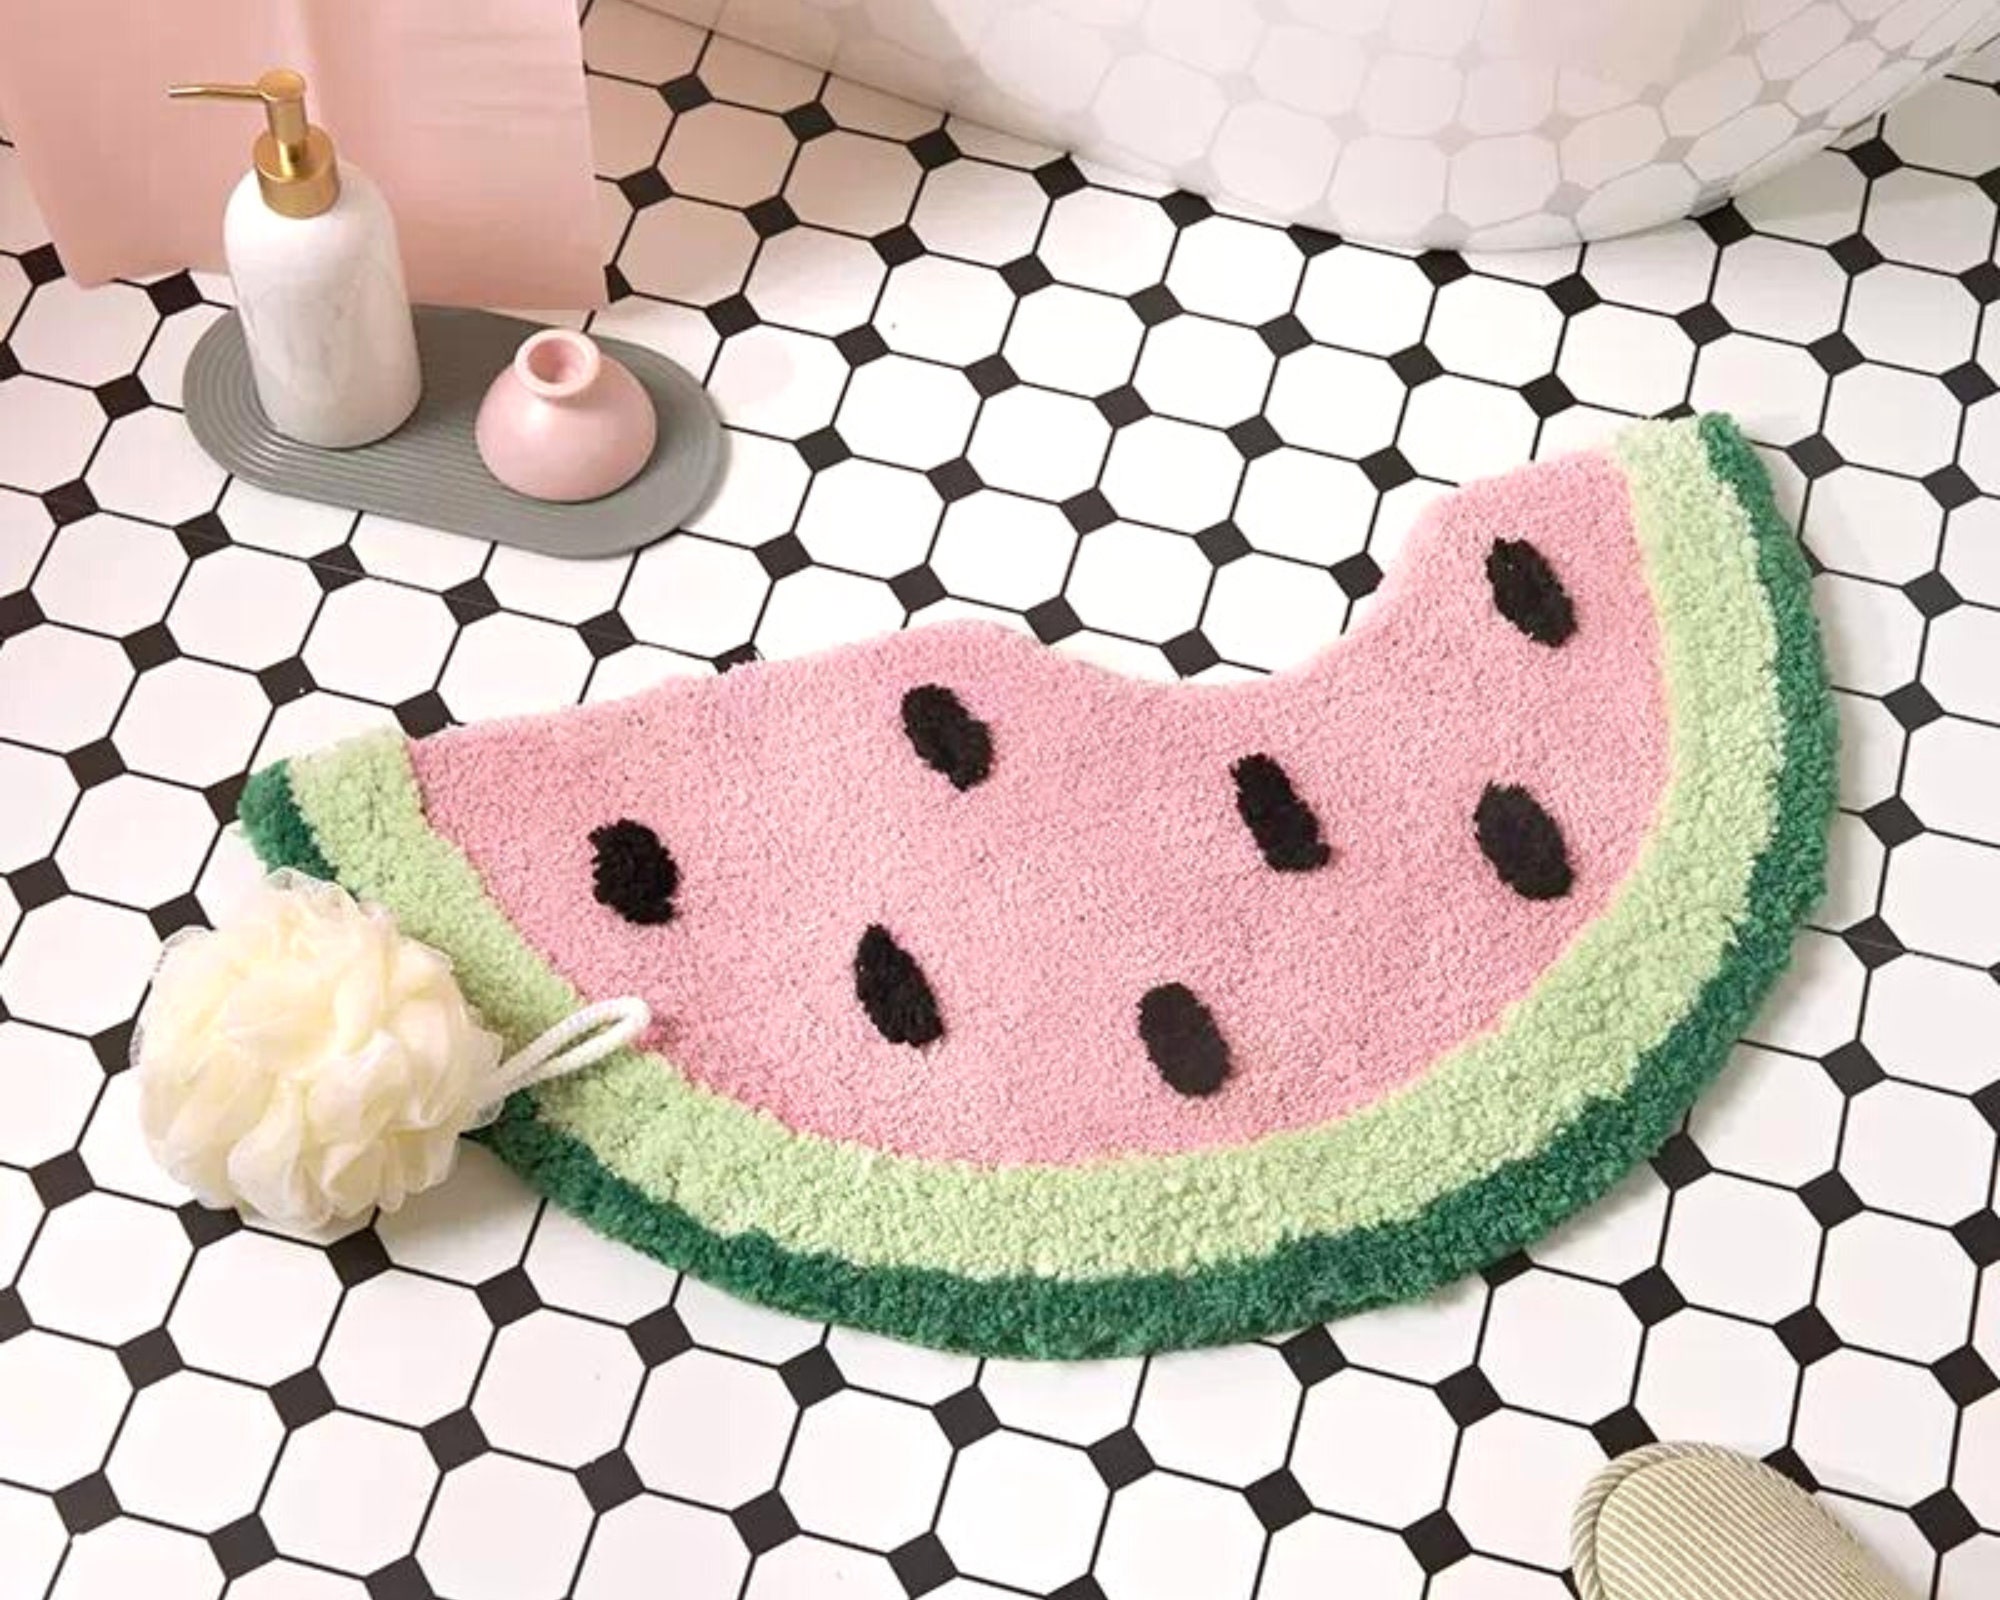 Watermelon Bathroom Rug Mat  Extra Soft and Absorbent Microfiber